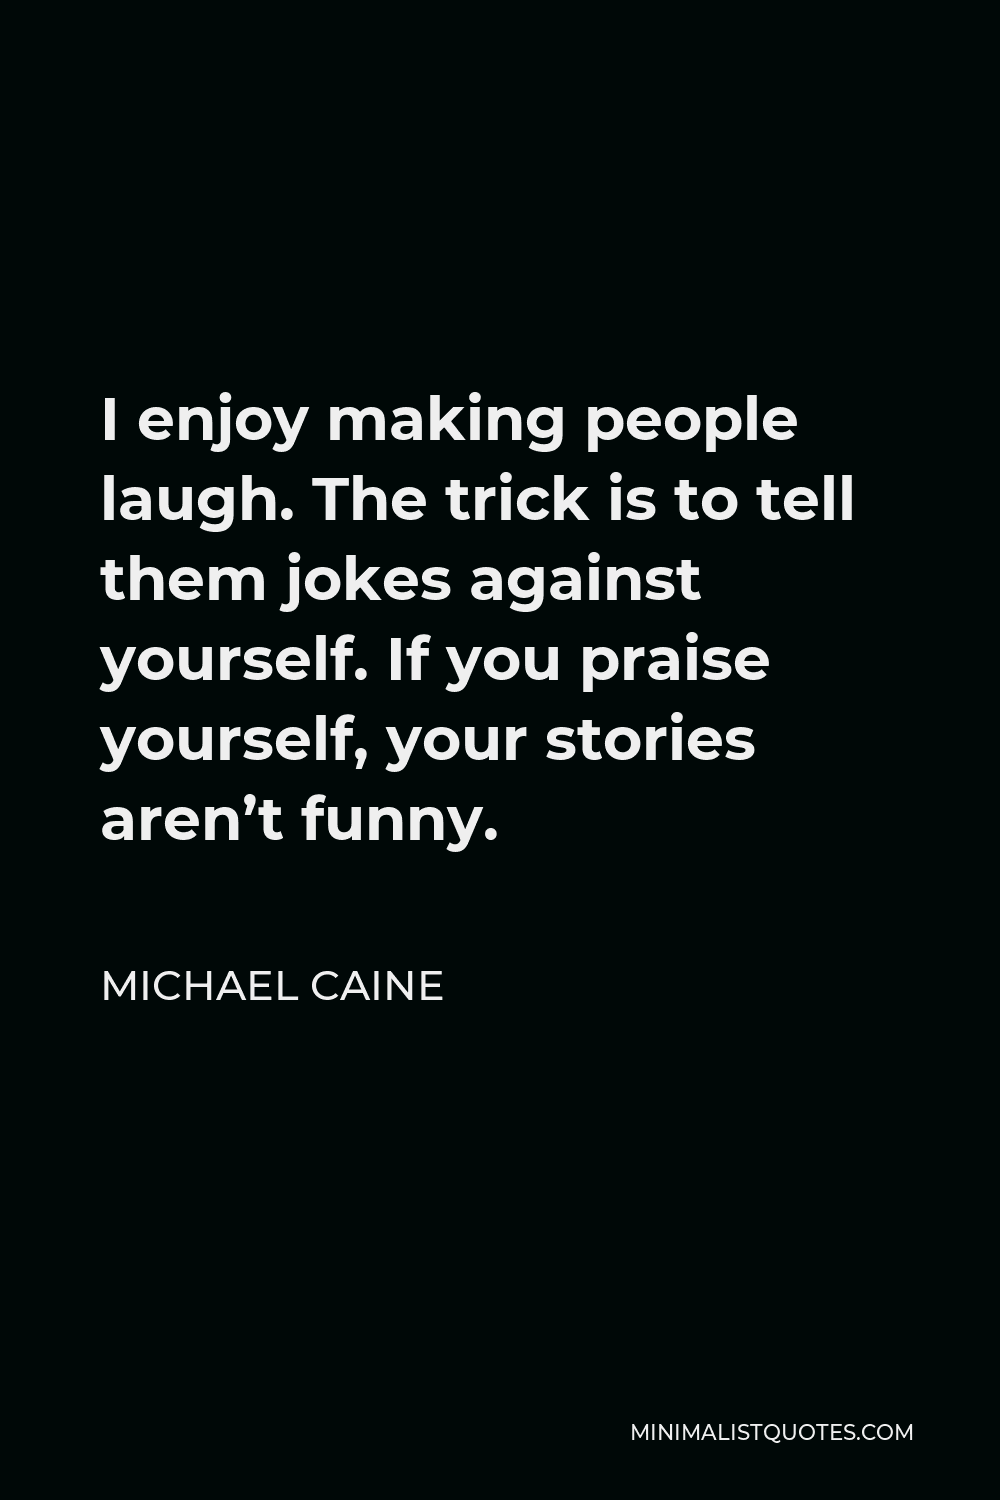 Michael Caine Quote - I enjoy making people laugh. The trick is to tell them jokes against yourself. If you praise yourself, your stories aren’t funny.